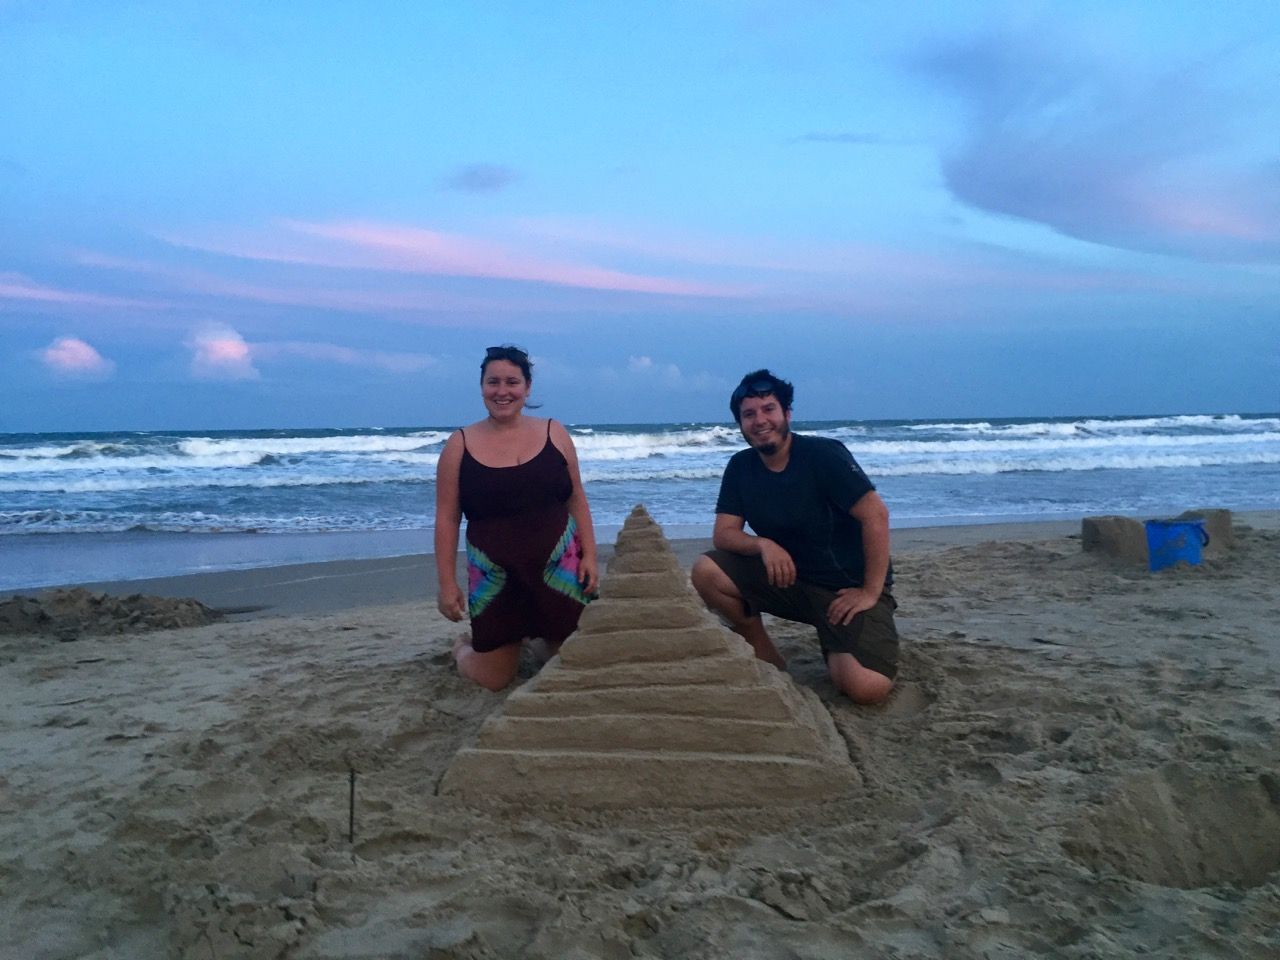 Man and woman posing with sandcastle.